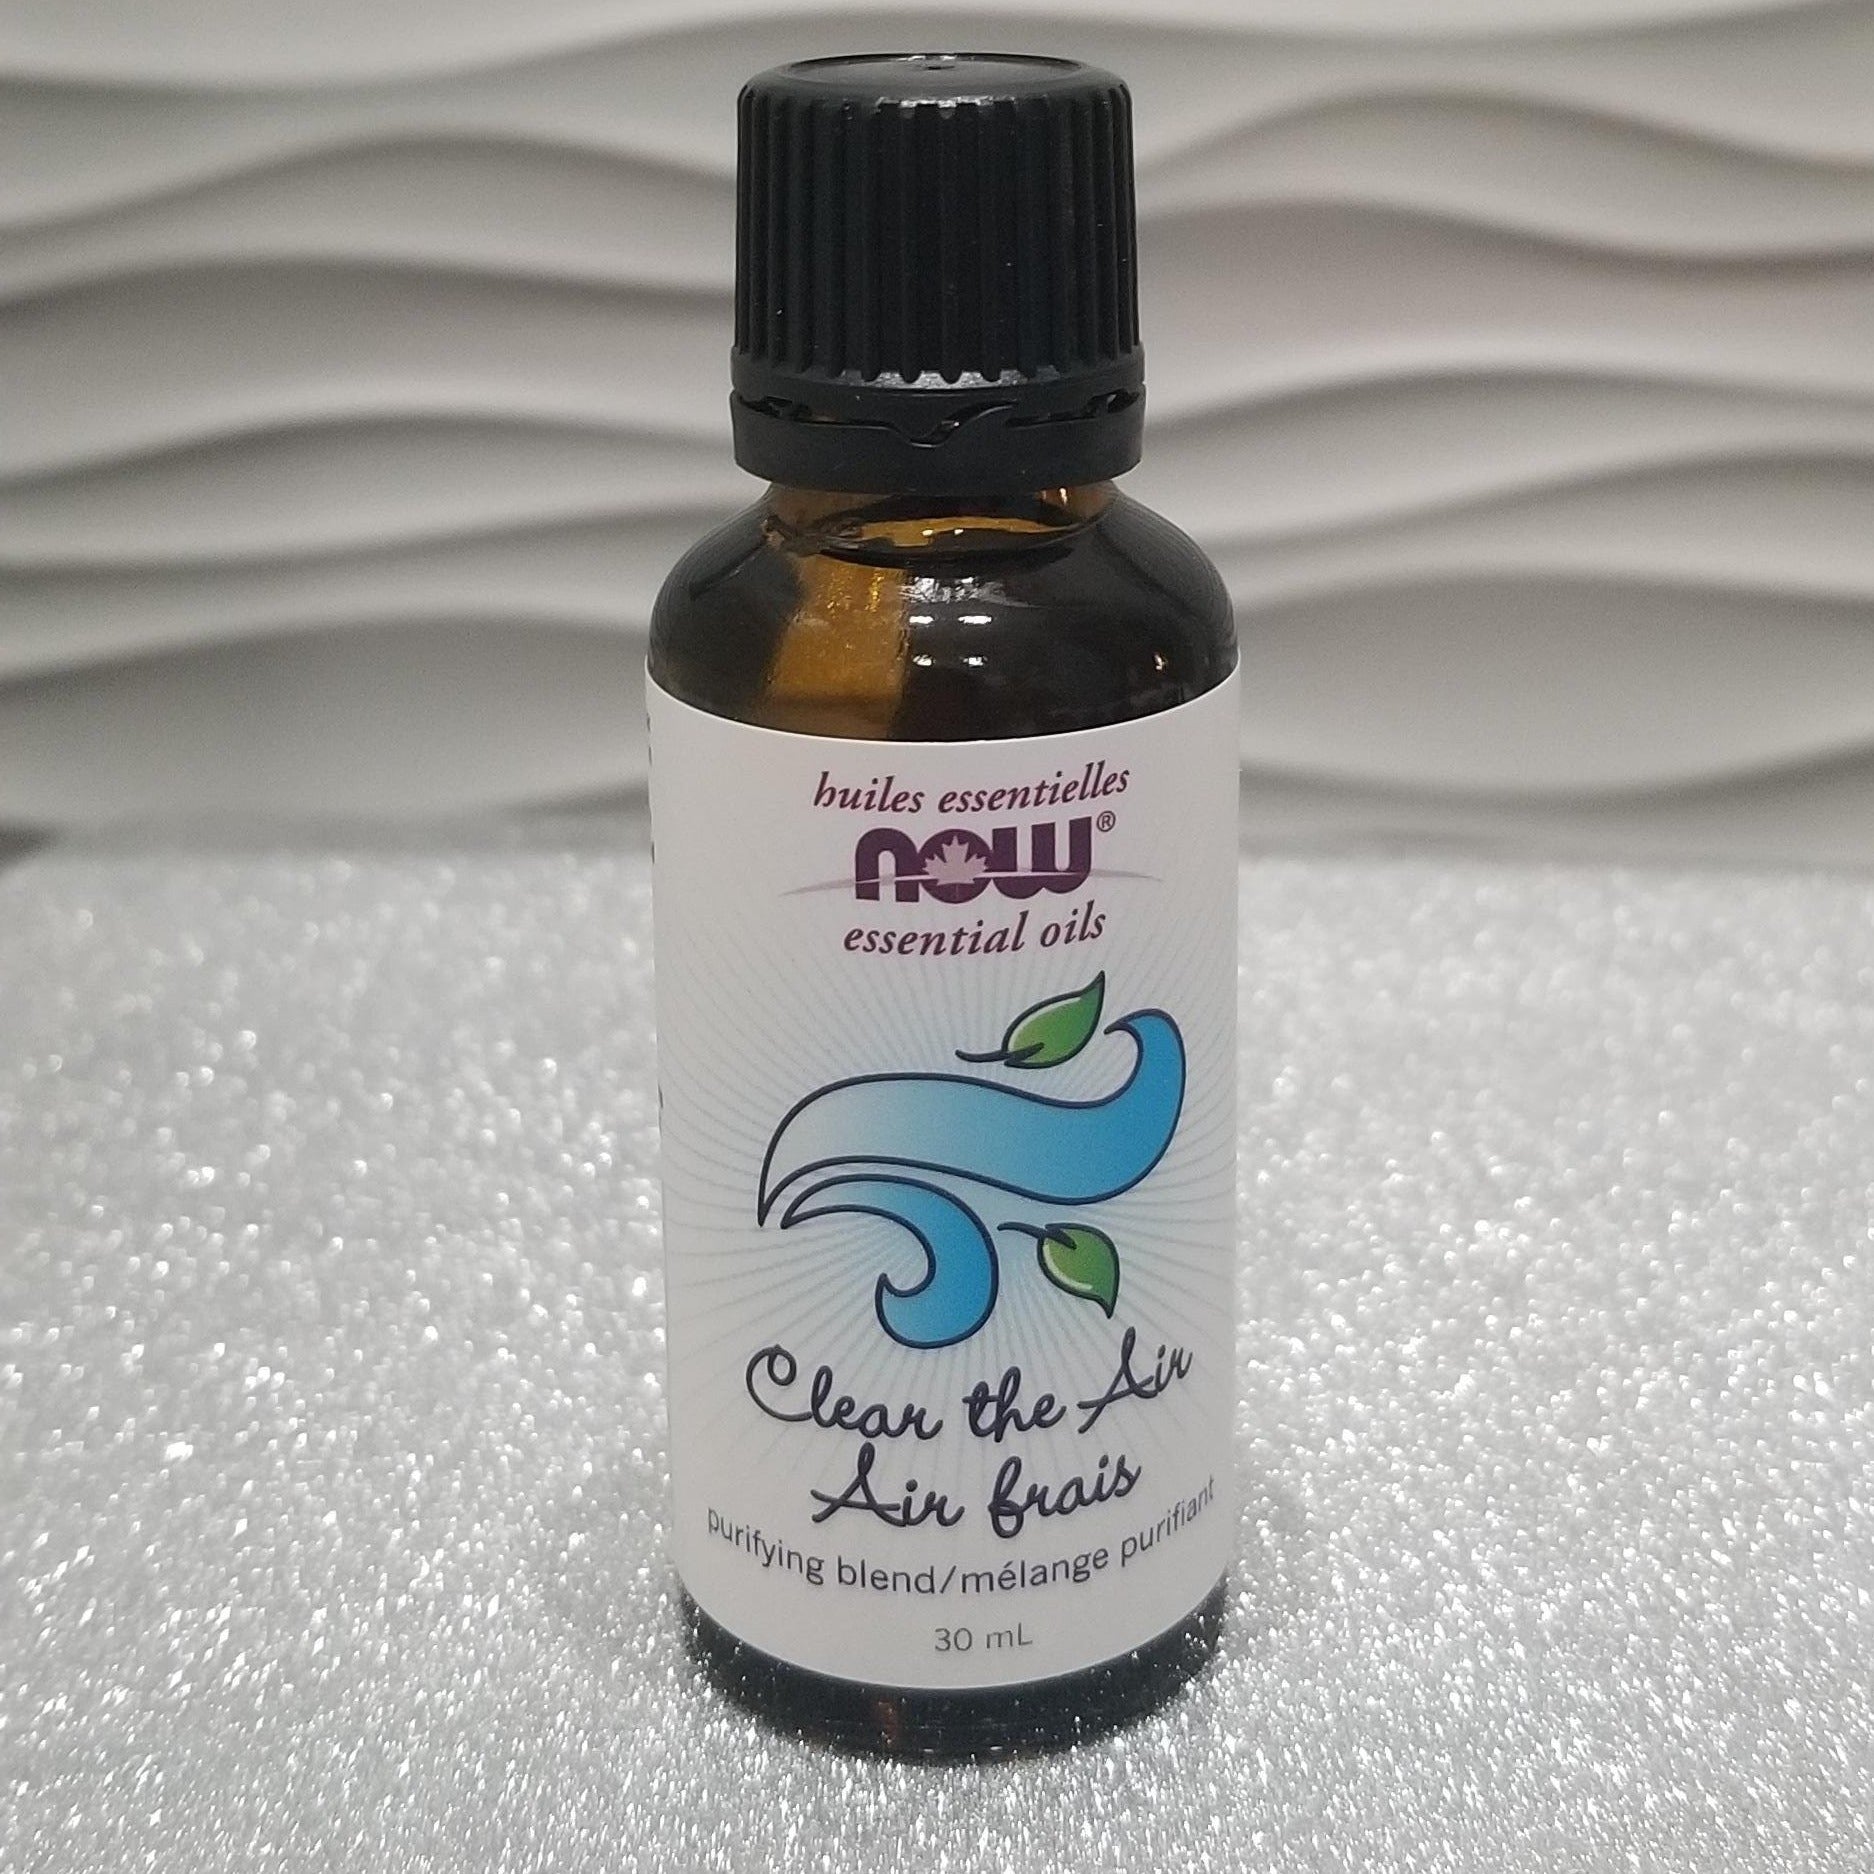 Clear the Air Essential oil by Now 30ml